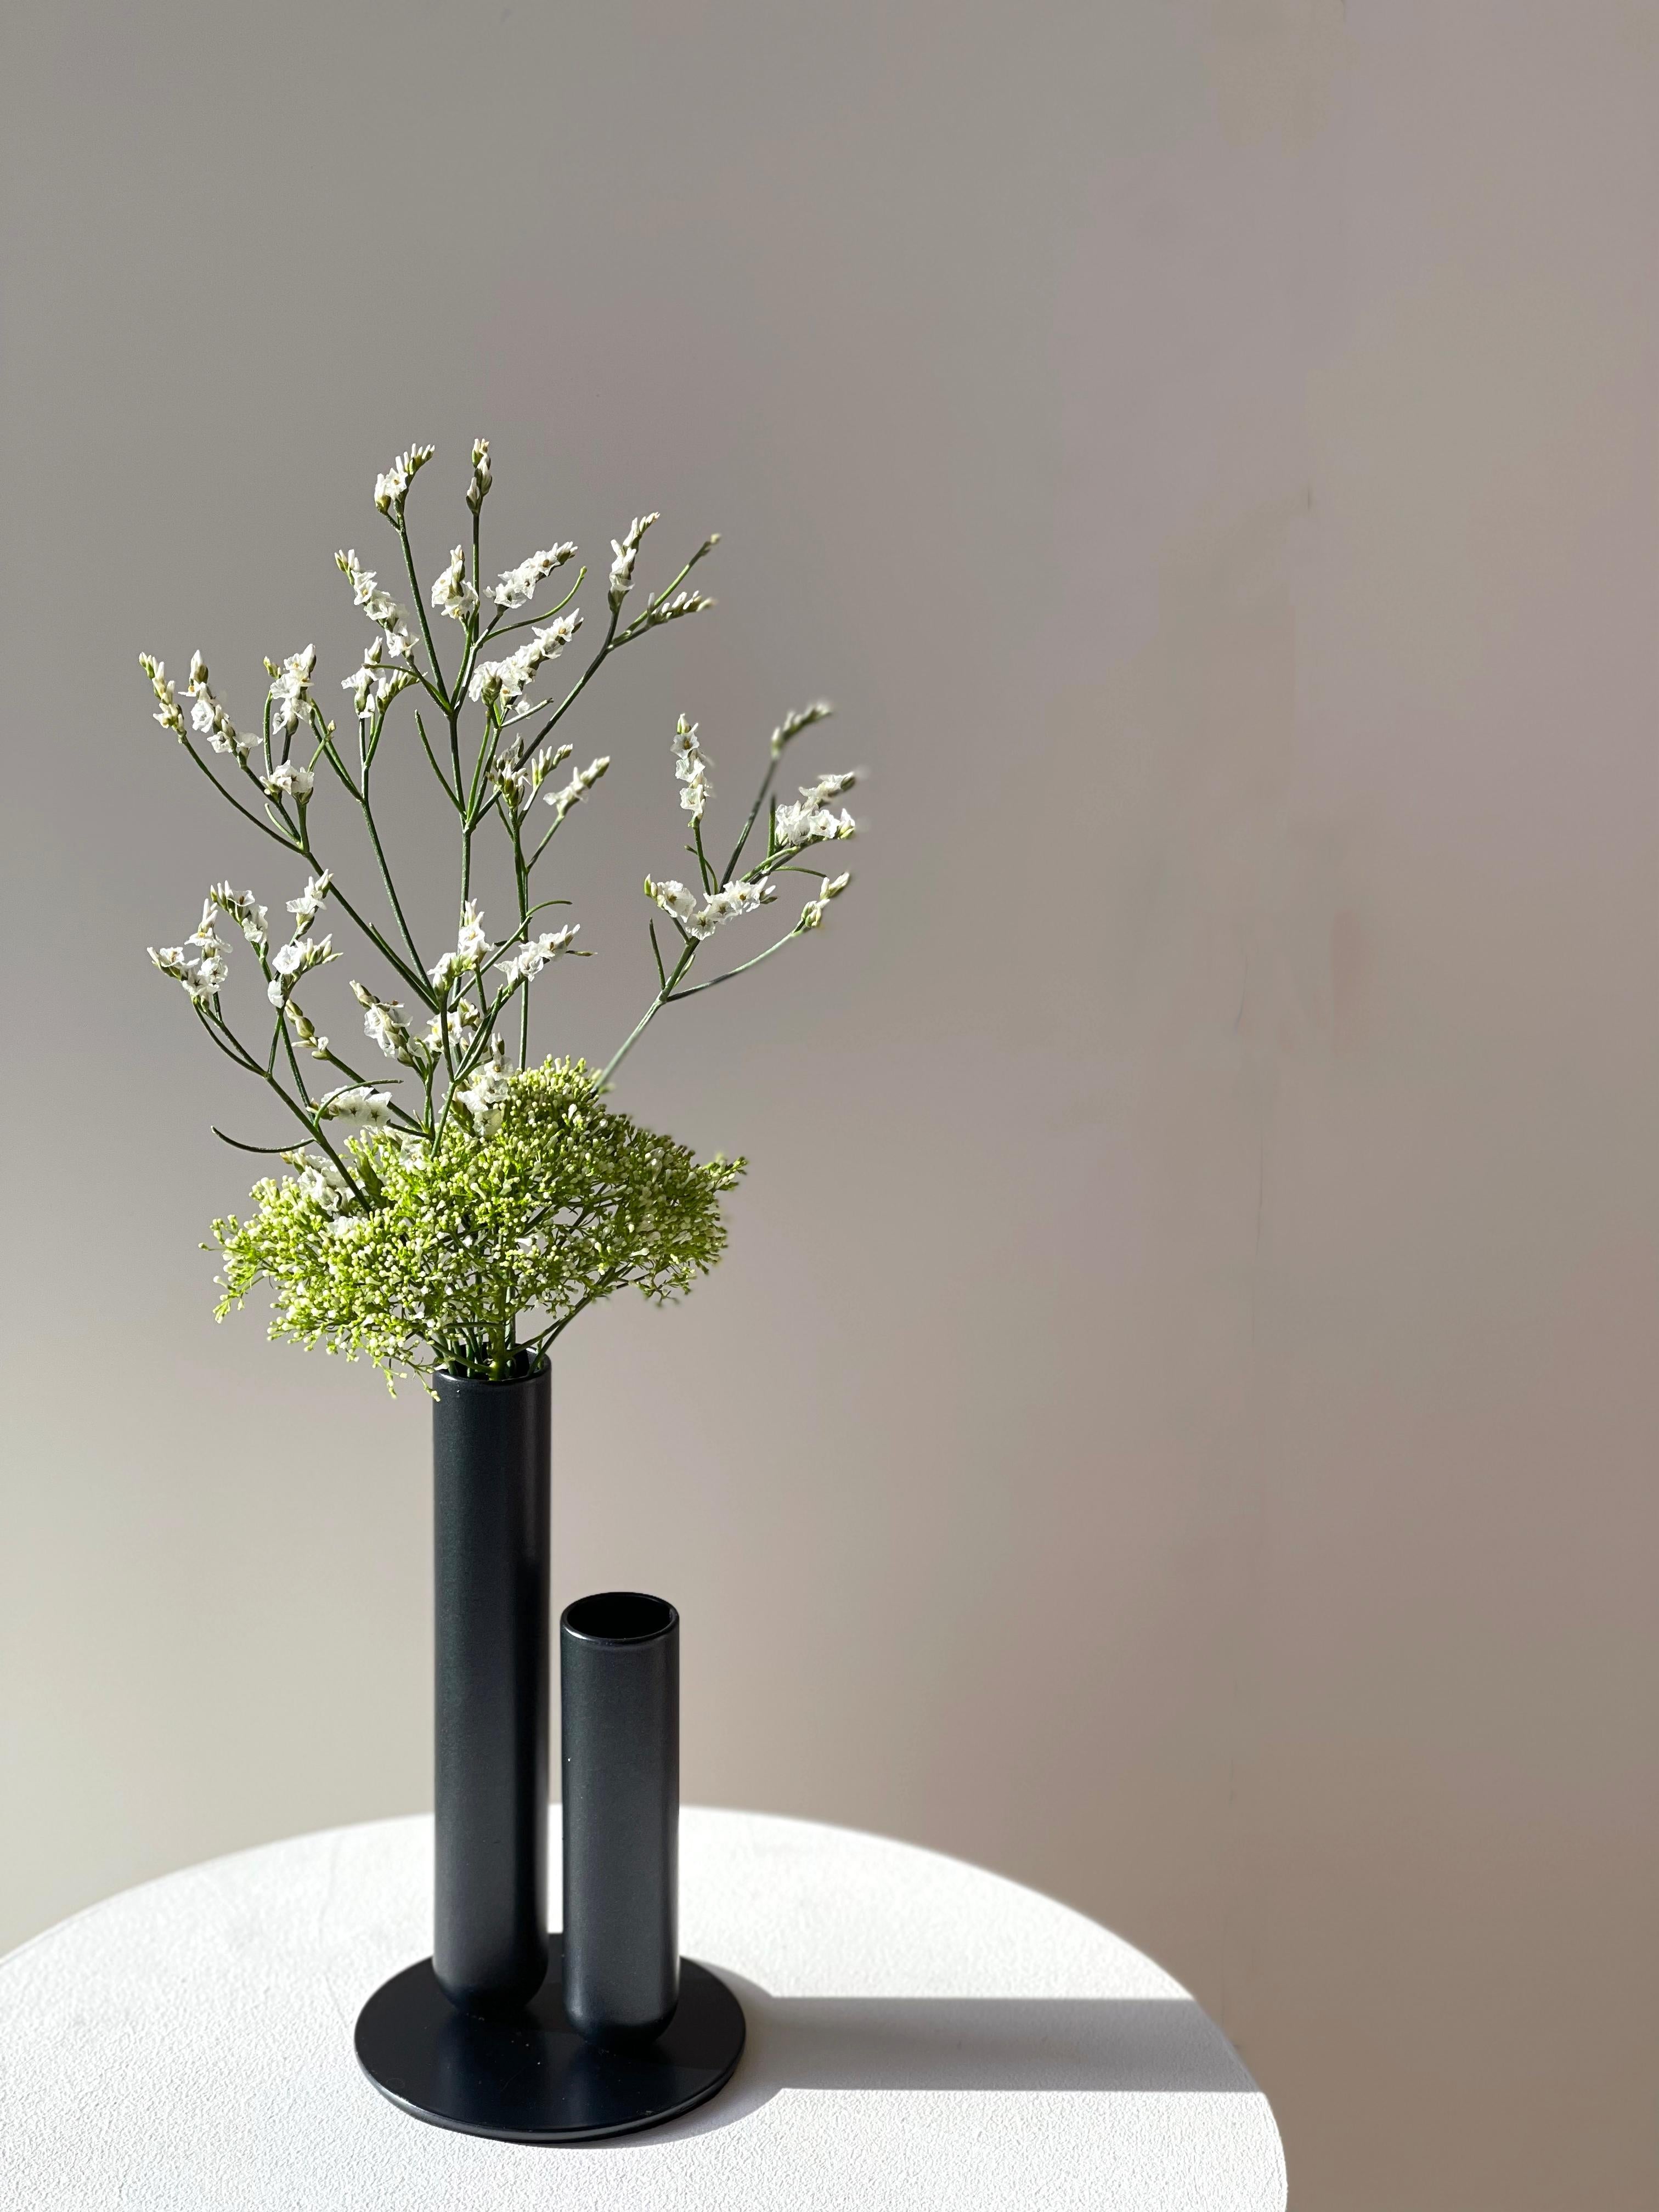 Turned Set of 2 Soliflore Black Vases by Mademoiselle Jo For Sale